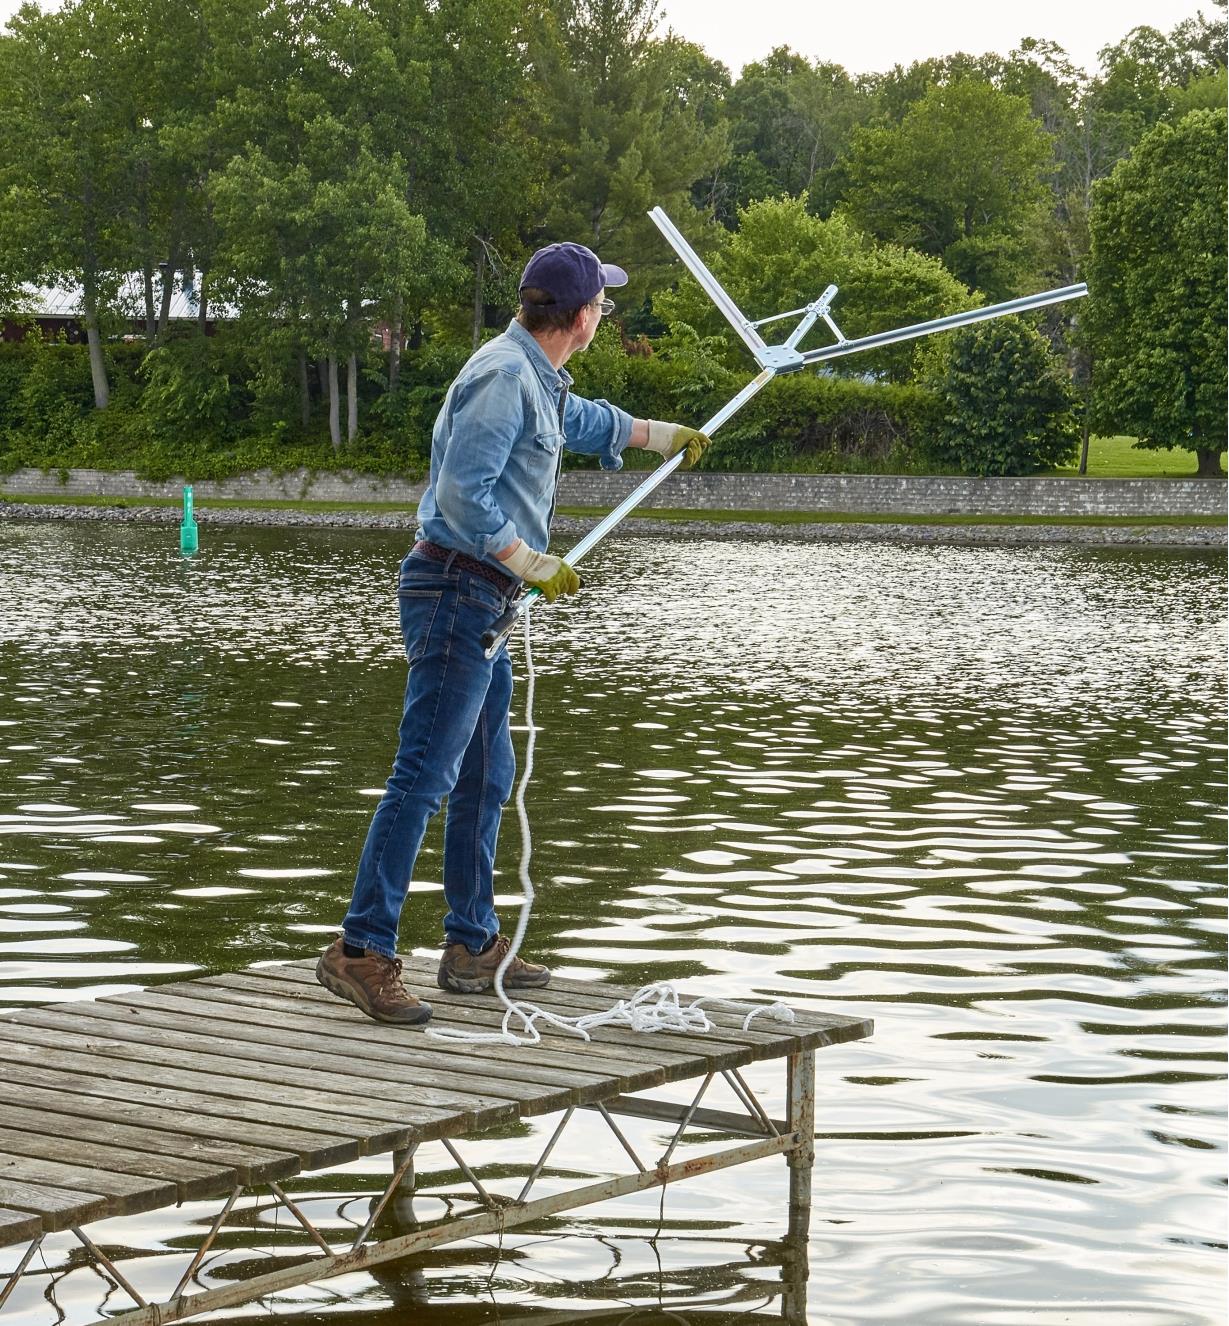 A man at the end of a dock holding a Weed Razer Pro